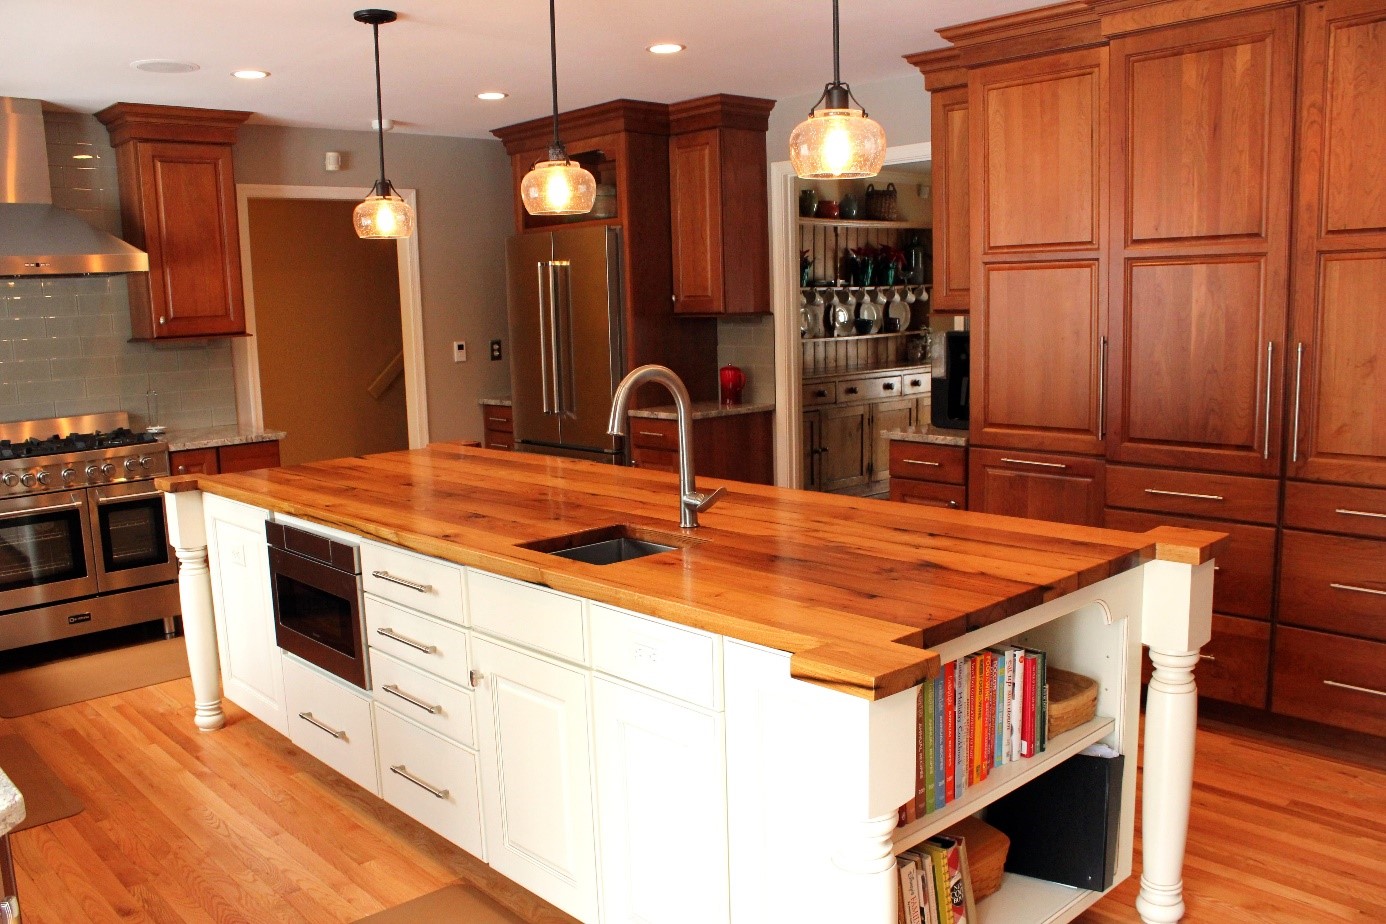 Types of Wood Used in Kitchen Countertops